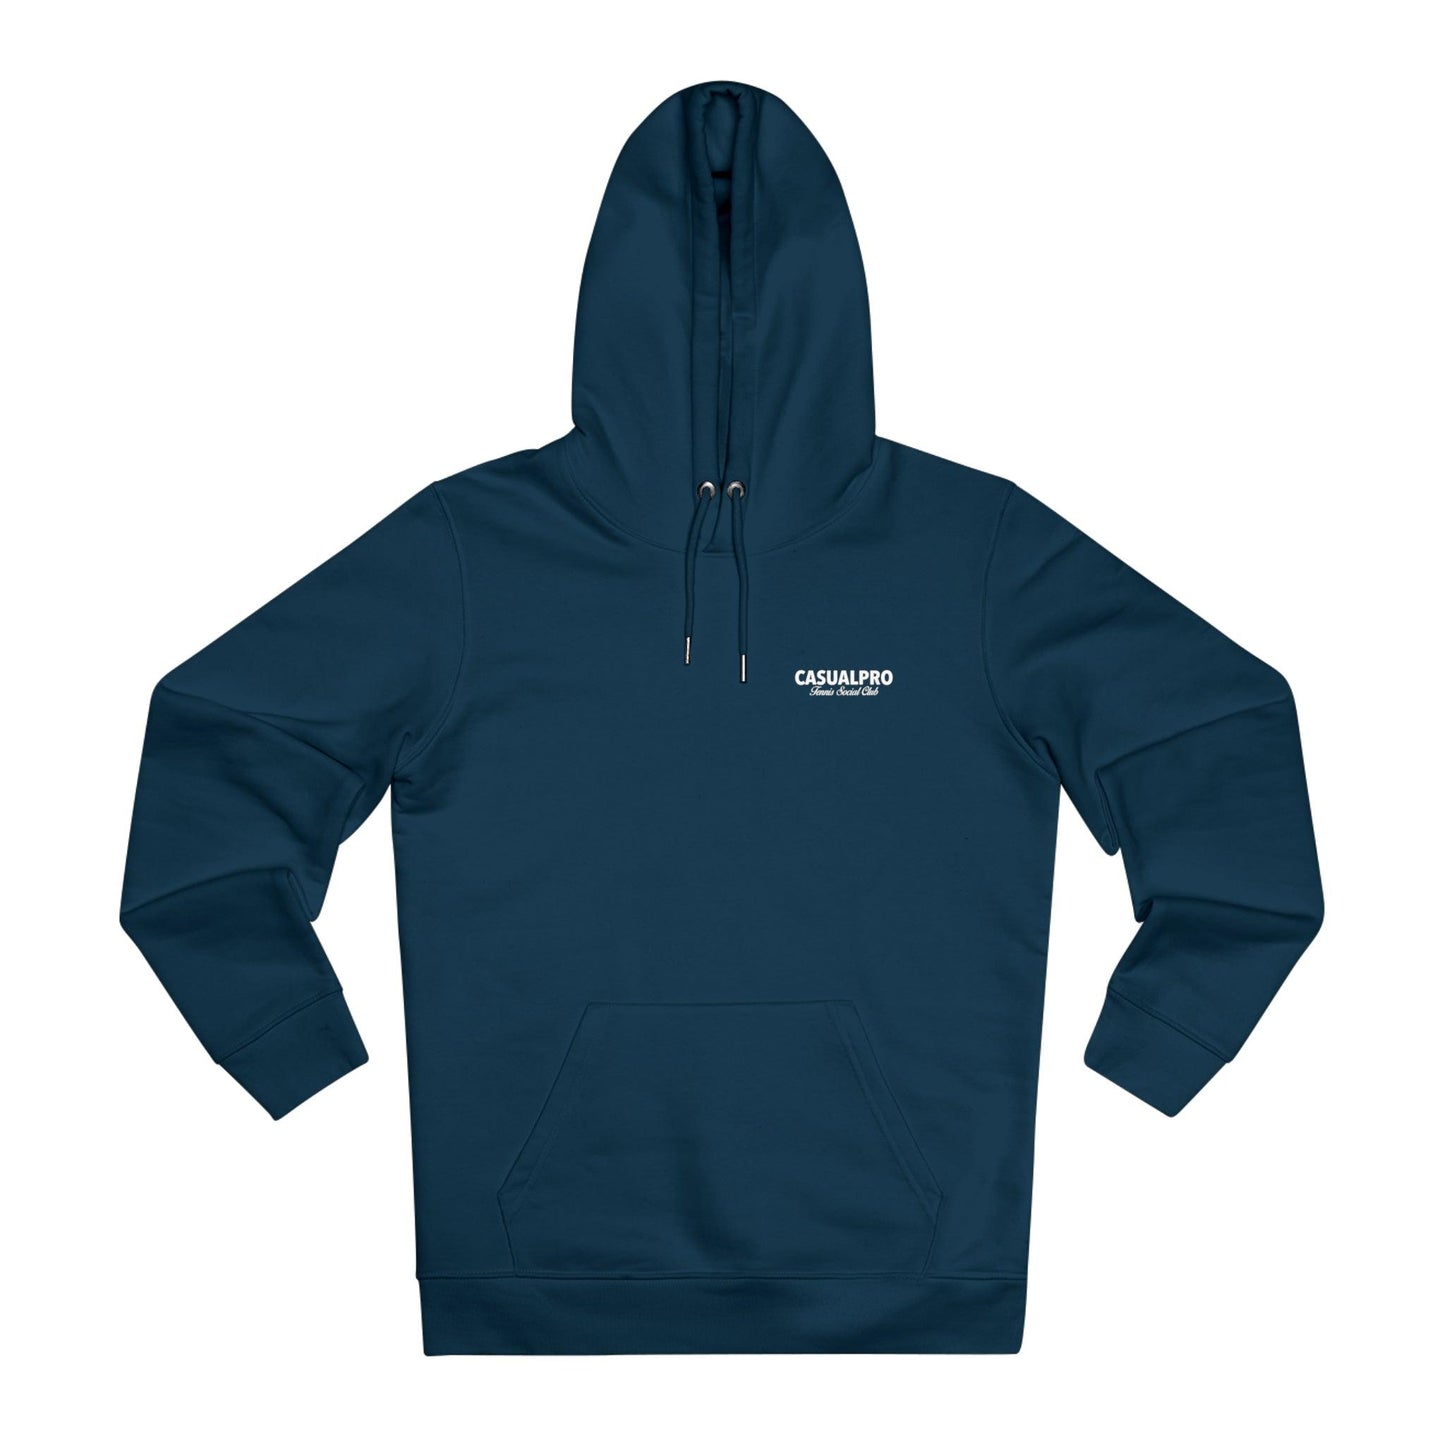 Blue hoodie with print on the front